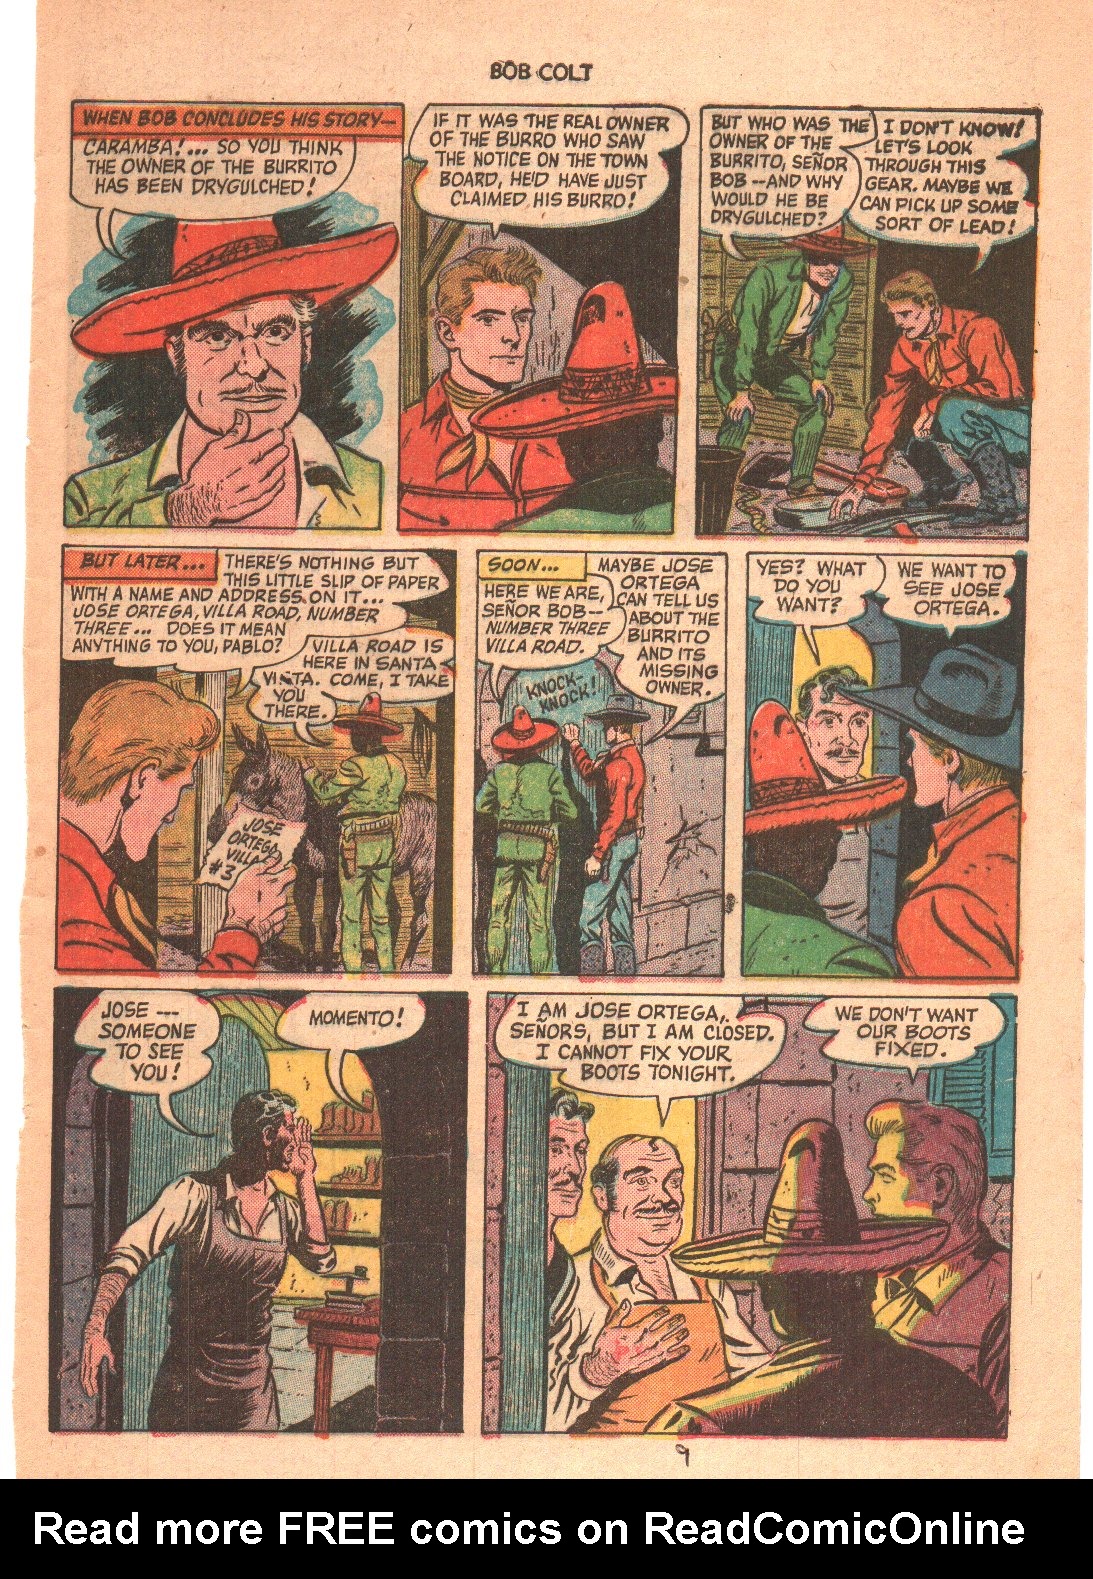 Read online Bob Colt Western comic -  Issue #4 - 9